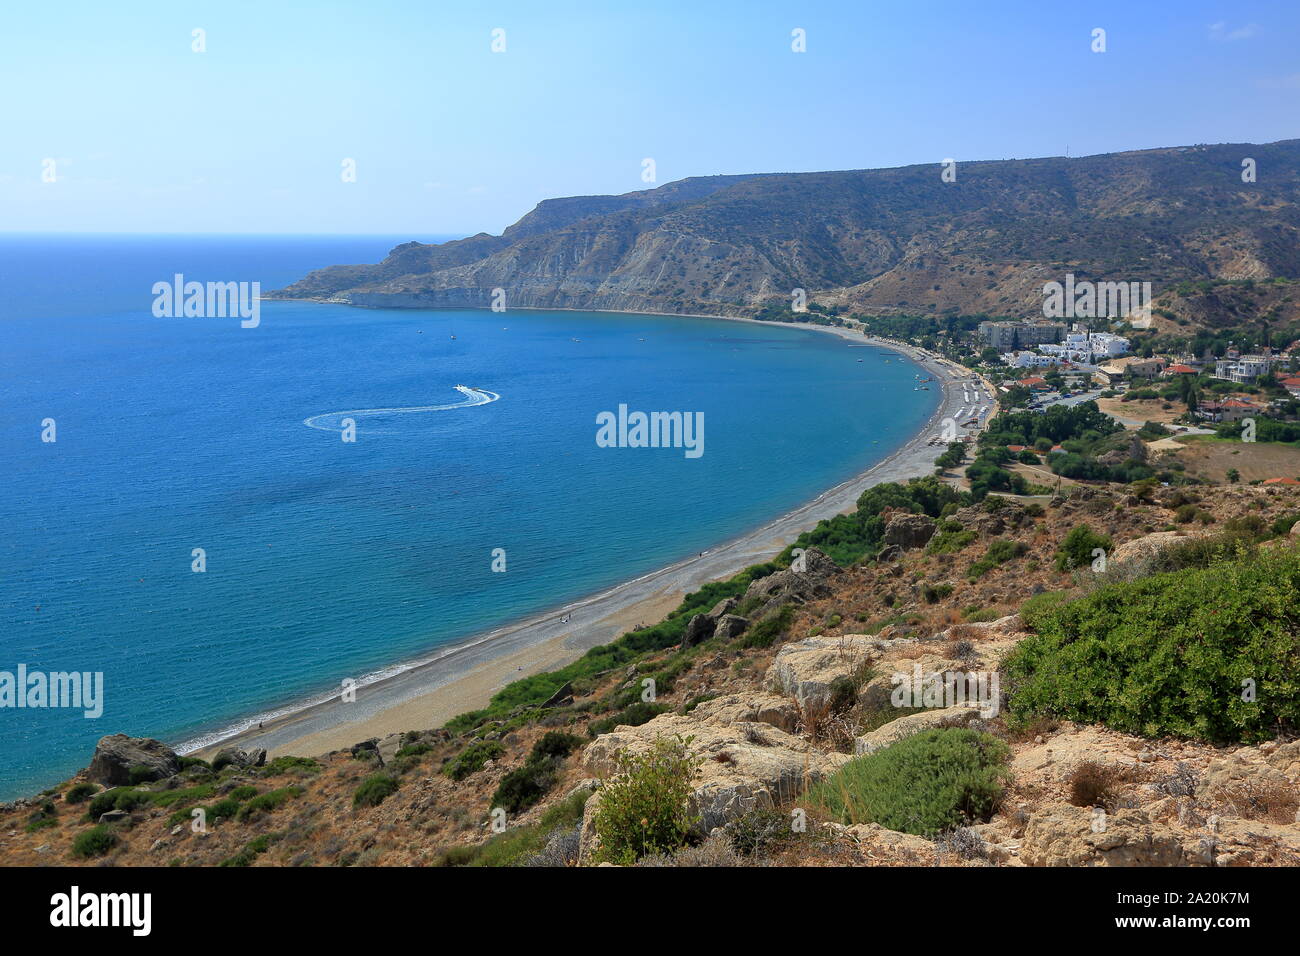 Beautiful landscape of Mediterranean sea bay and beach in Pissouri village, Cyprus, sand, arid hills surrounding area, seen from top of  point view. Stock Photo